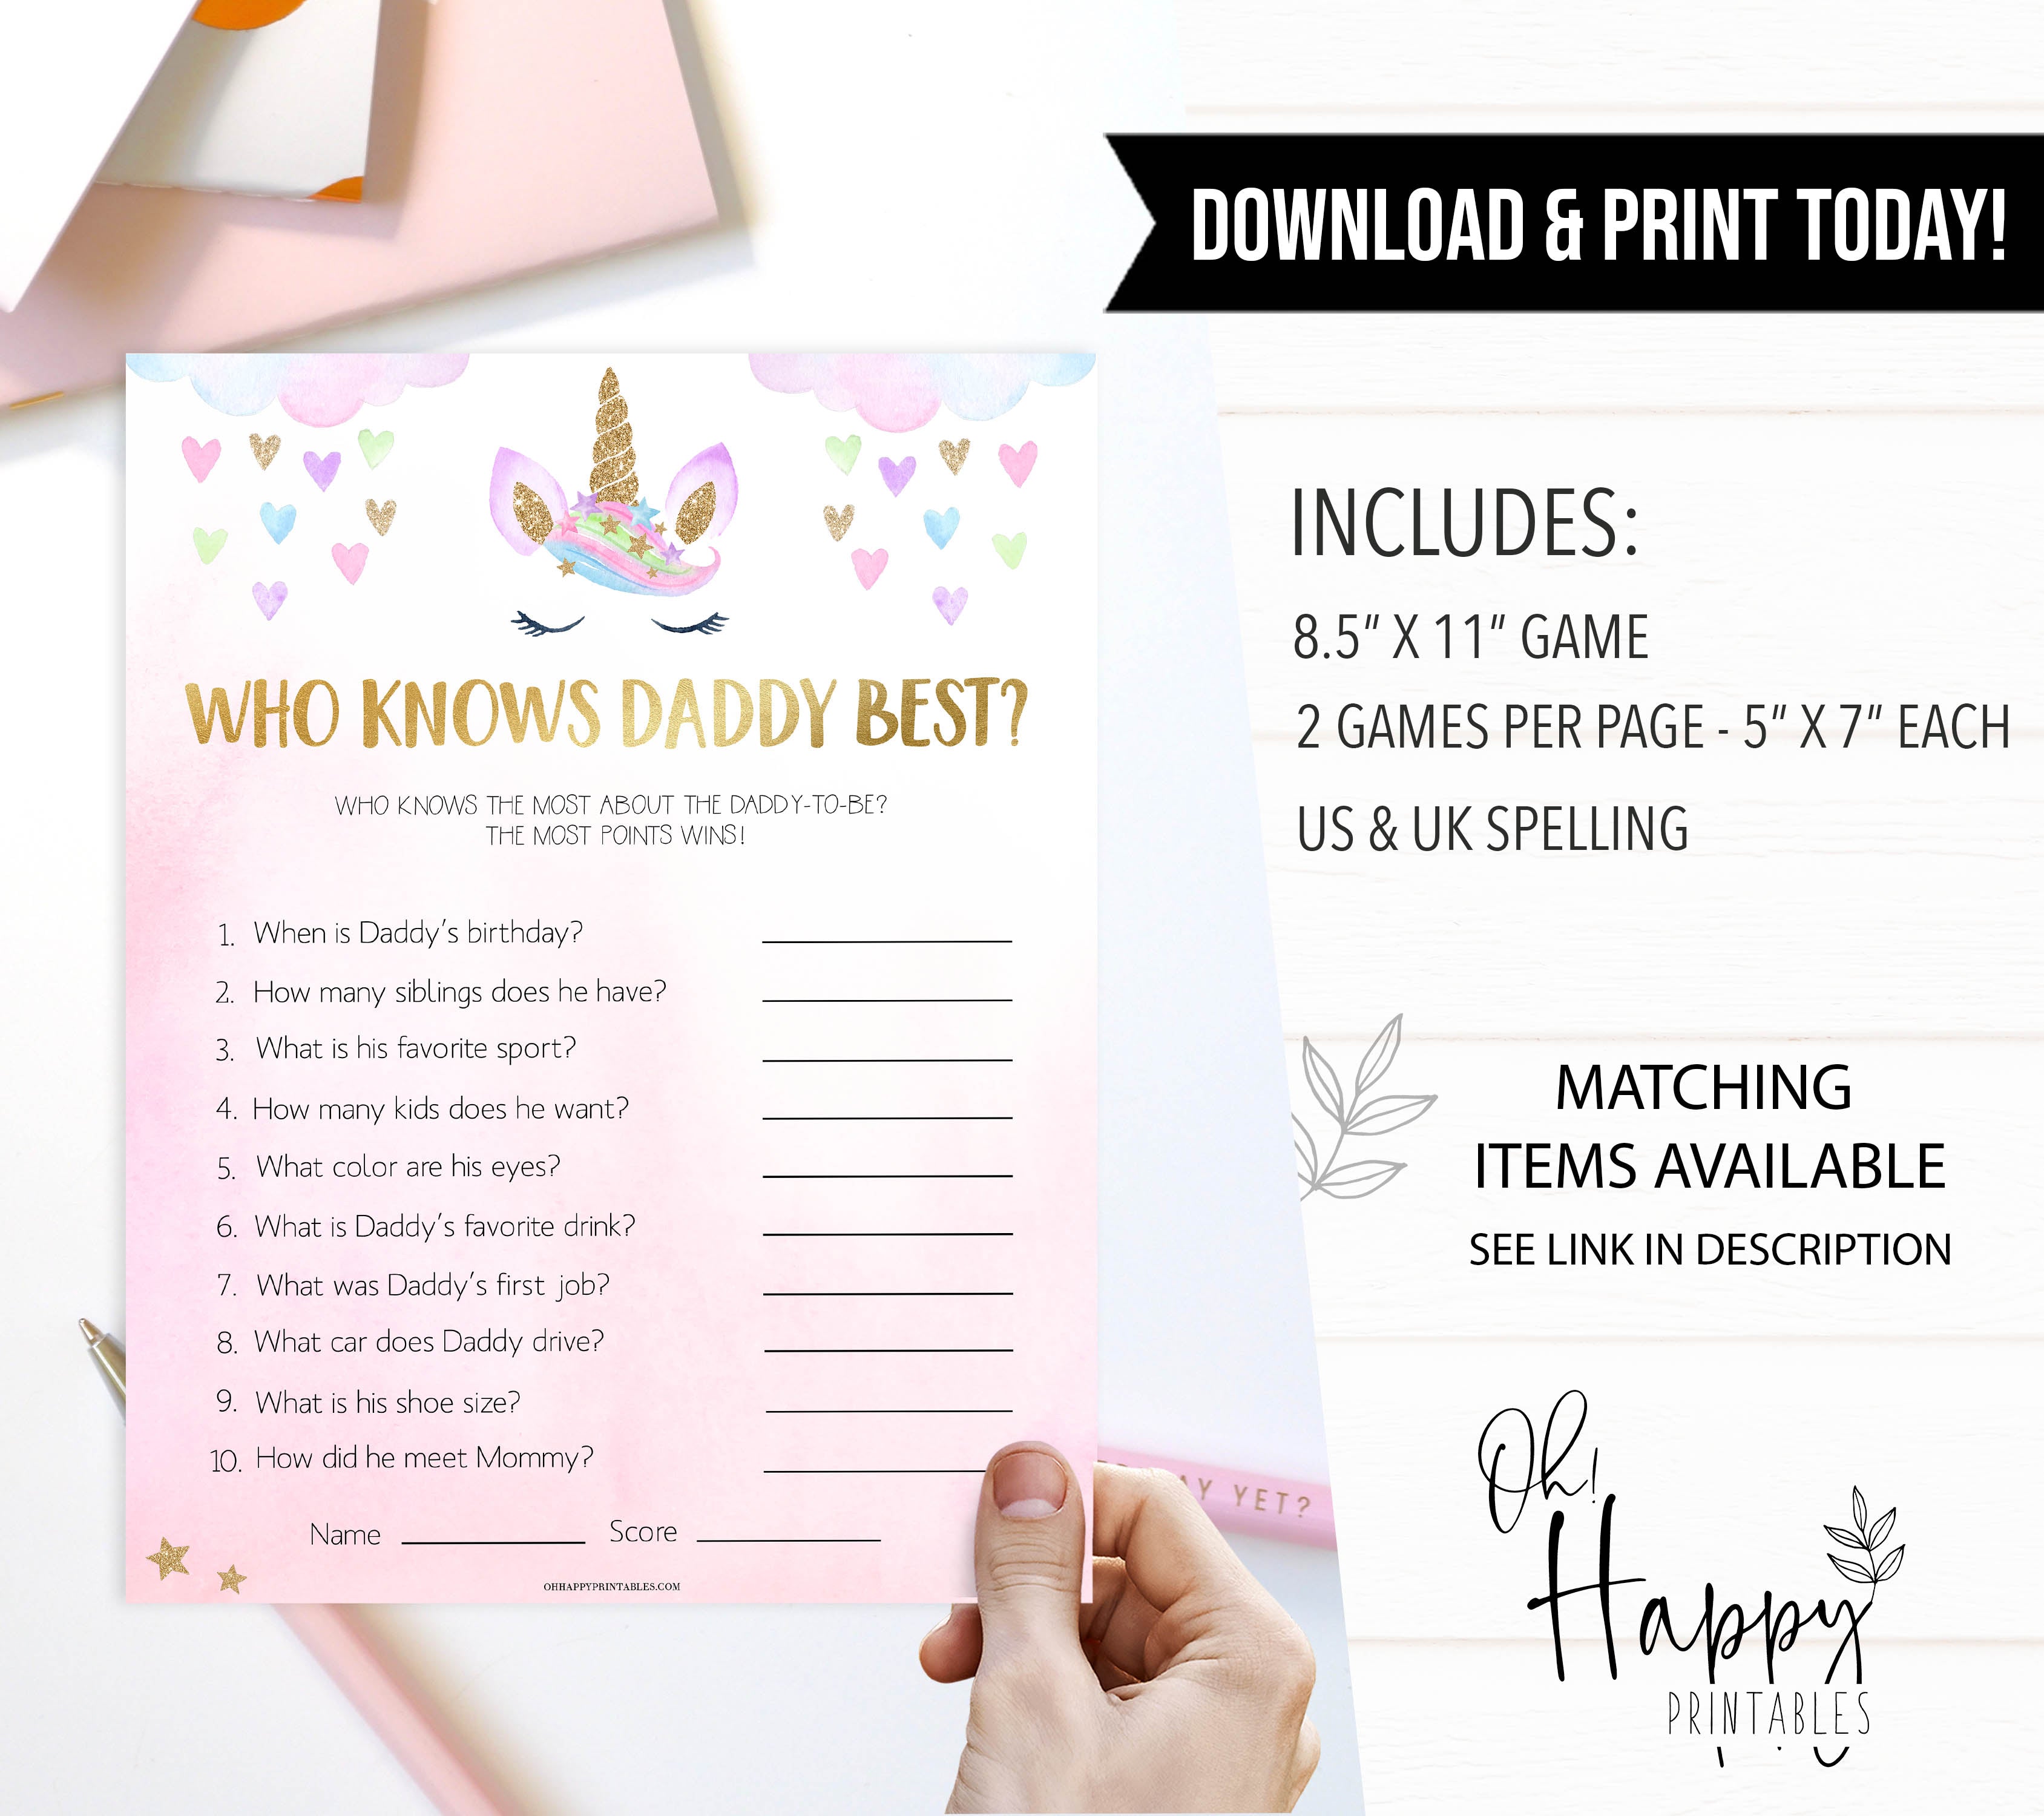 who knows daddy best game, Printable baby shower games, unicorn baby games, baby shower games, fun baby shower ideas, top baby shower ideas, unicorn baby shower, baby shower games, fun unicorn baby shower ideas